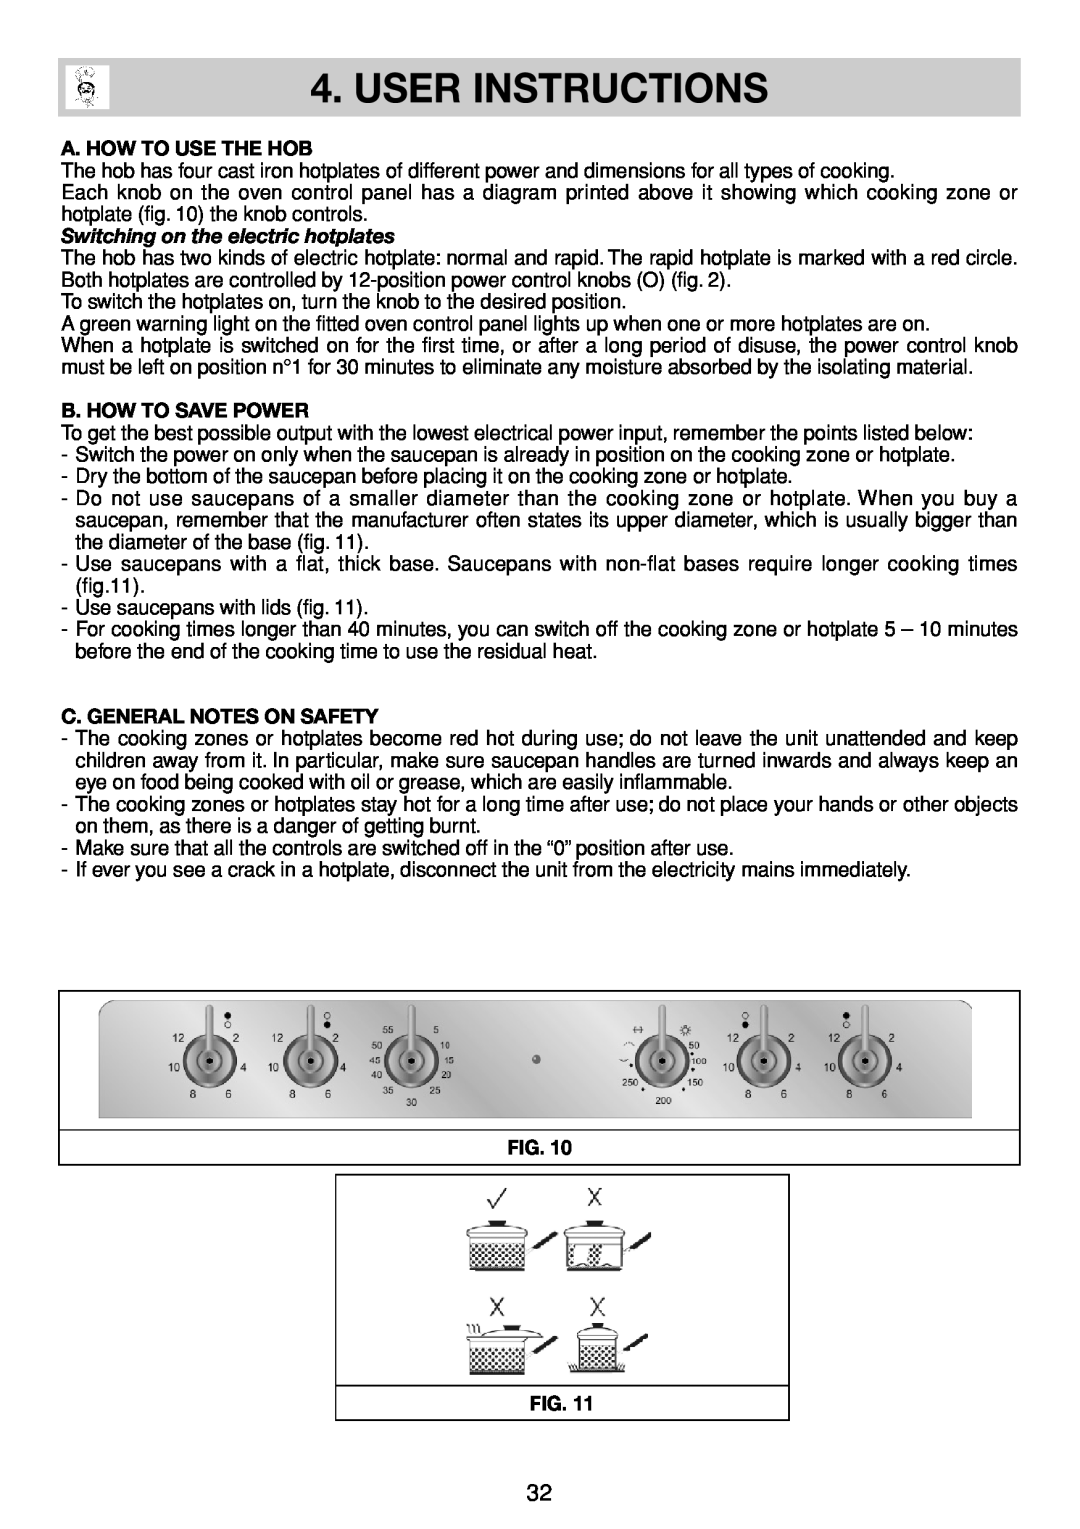 Smeg SE035 User Instructions, A. How To Use The Hob, B. How To Save Power, C. General Notes On Safety, Fig. Fig 